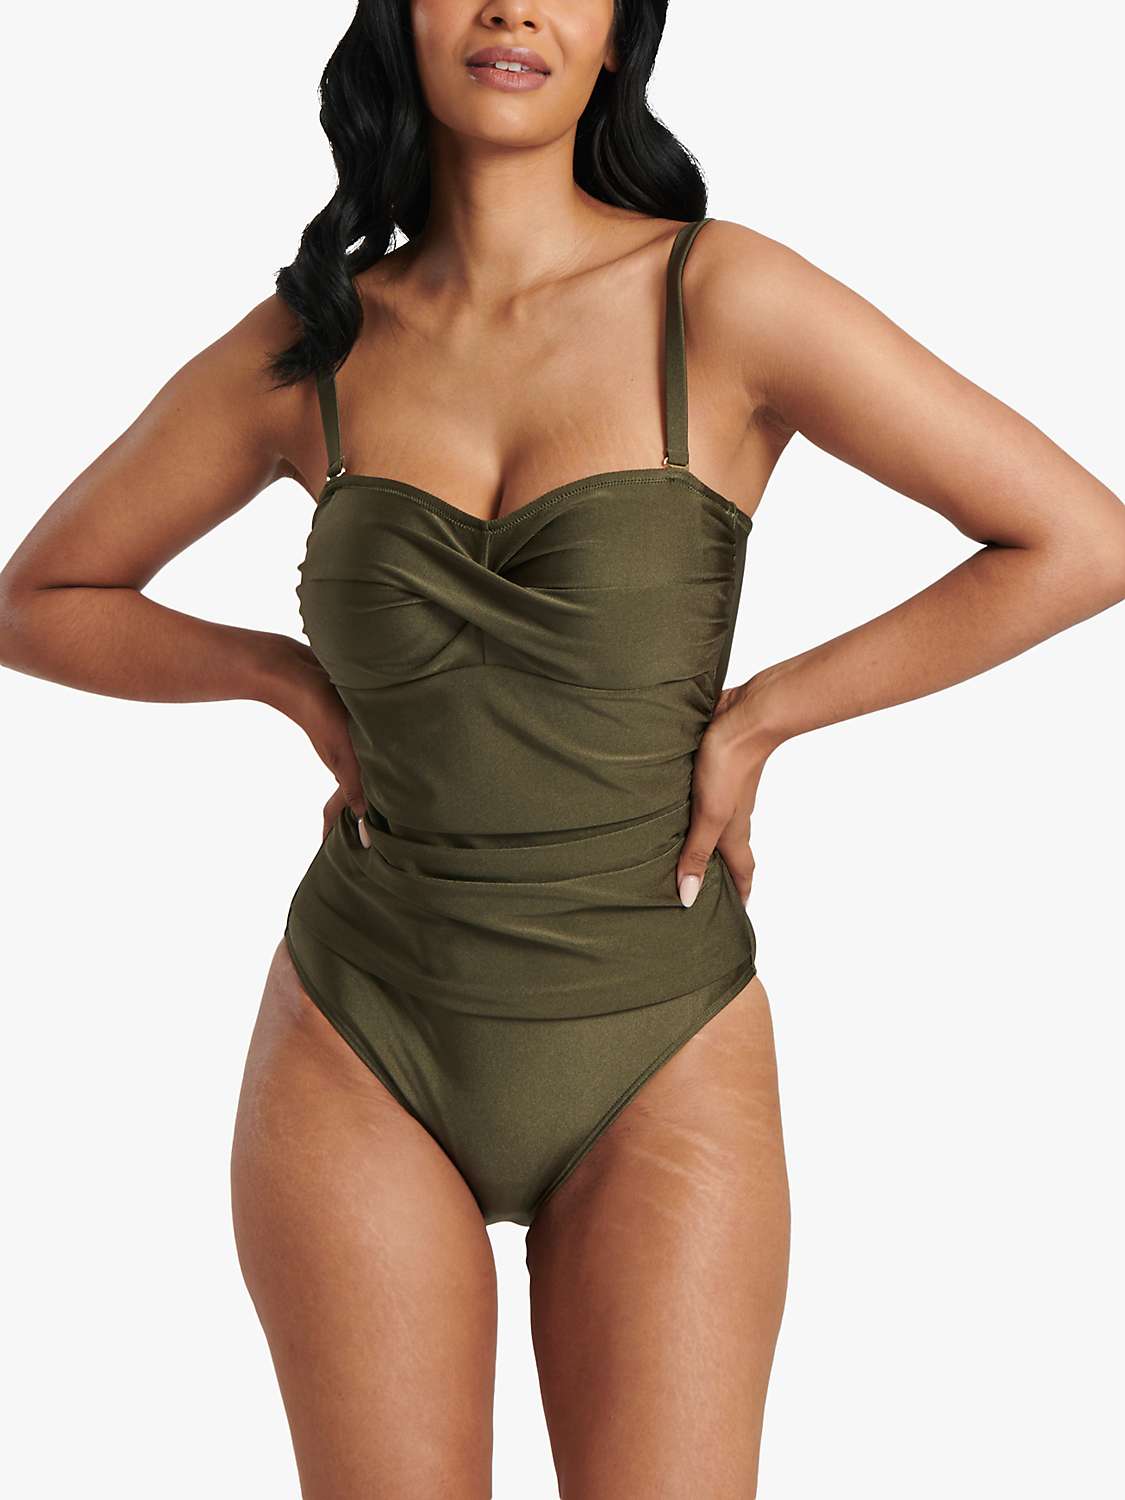 Buy South Beach Bandeau Tummy Control Swimsuit, Olive Online at johnlewis.com